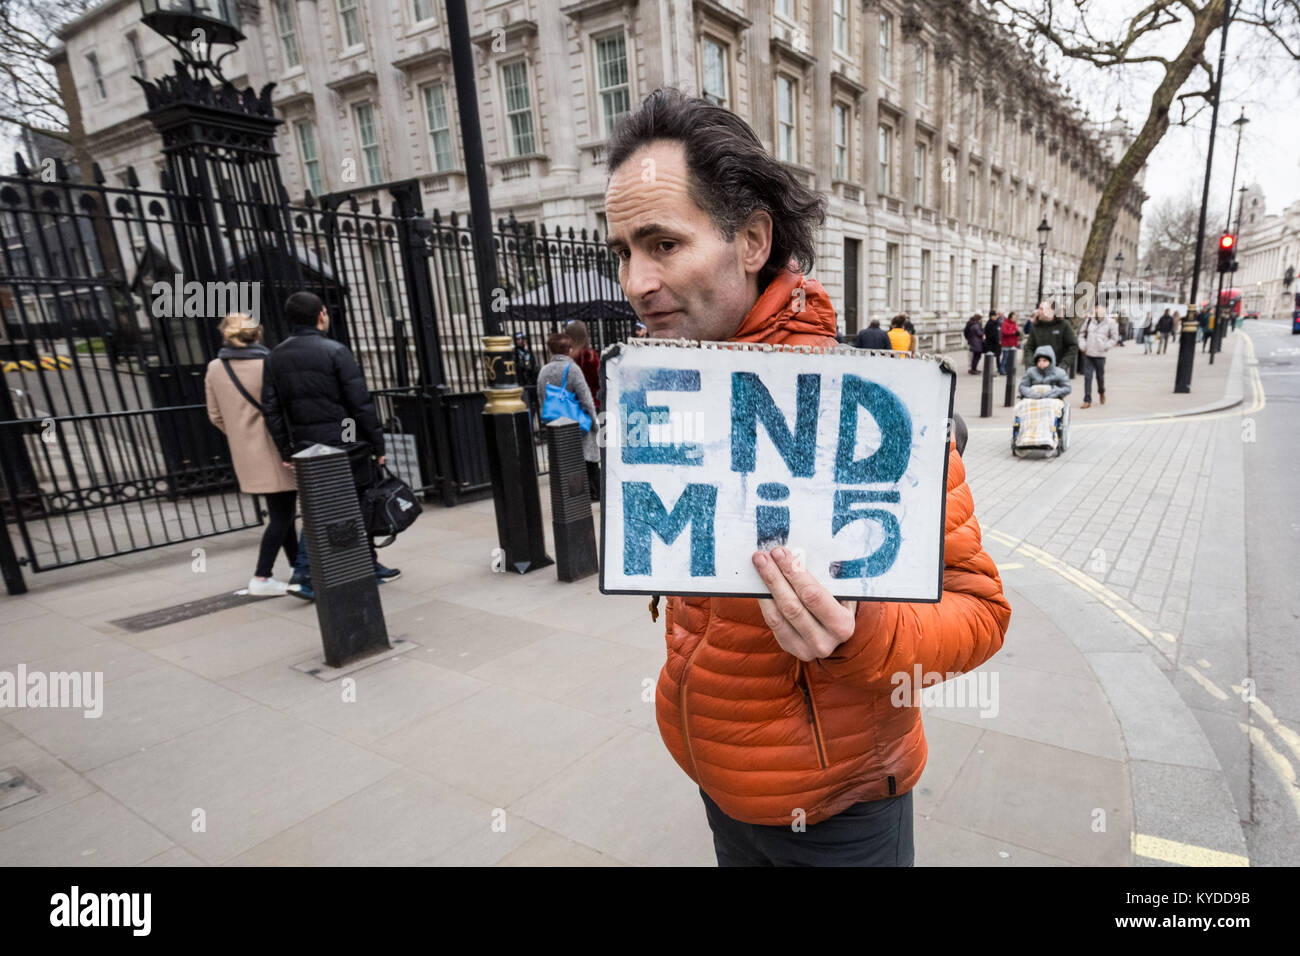 Downing Street, London, UK. 14th Jan, 2018. A lone protestor outside Downing Street gates holds a sign that reads 'END Mi5' referring to the United Kingdom's domestic secret intelligence agency. Credit: Guy Corbishley/Alamy Live News Stock Photo